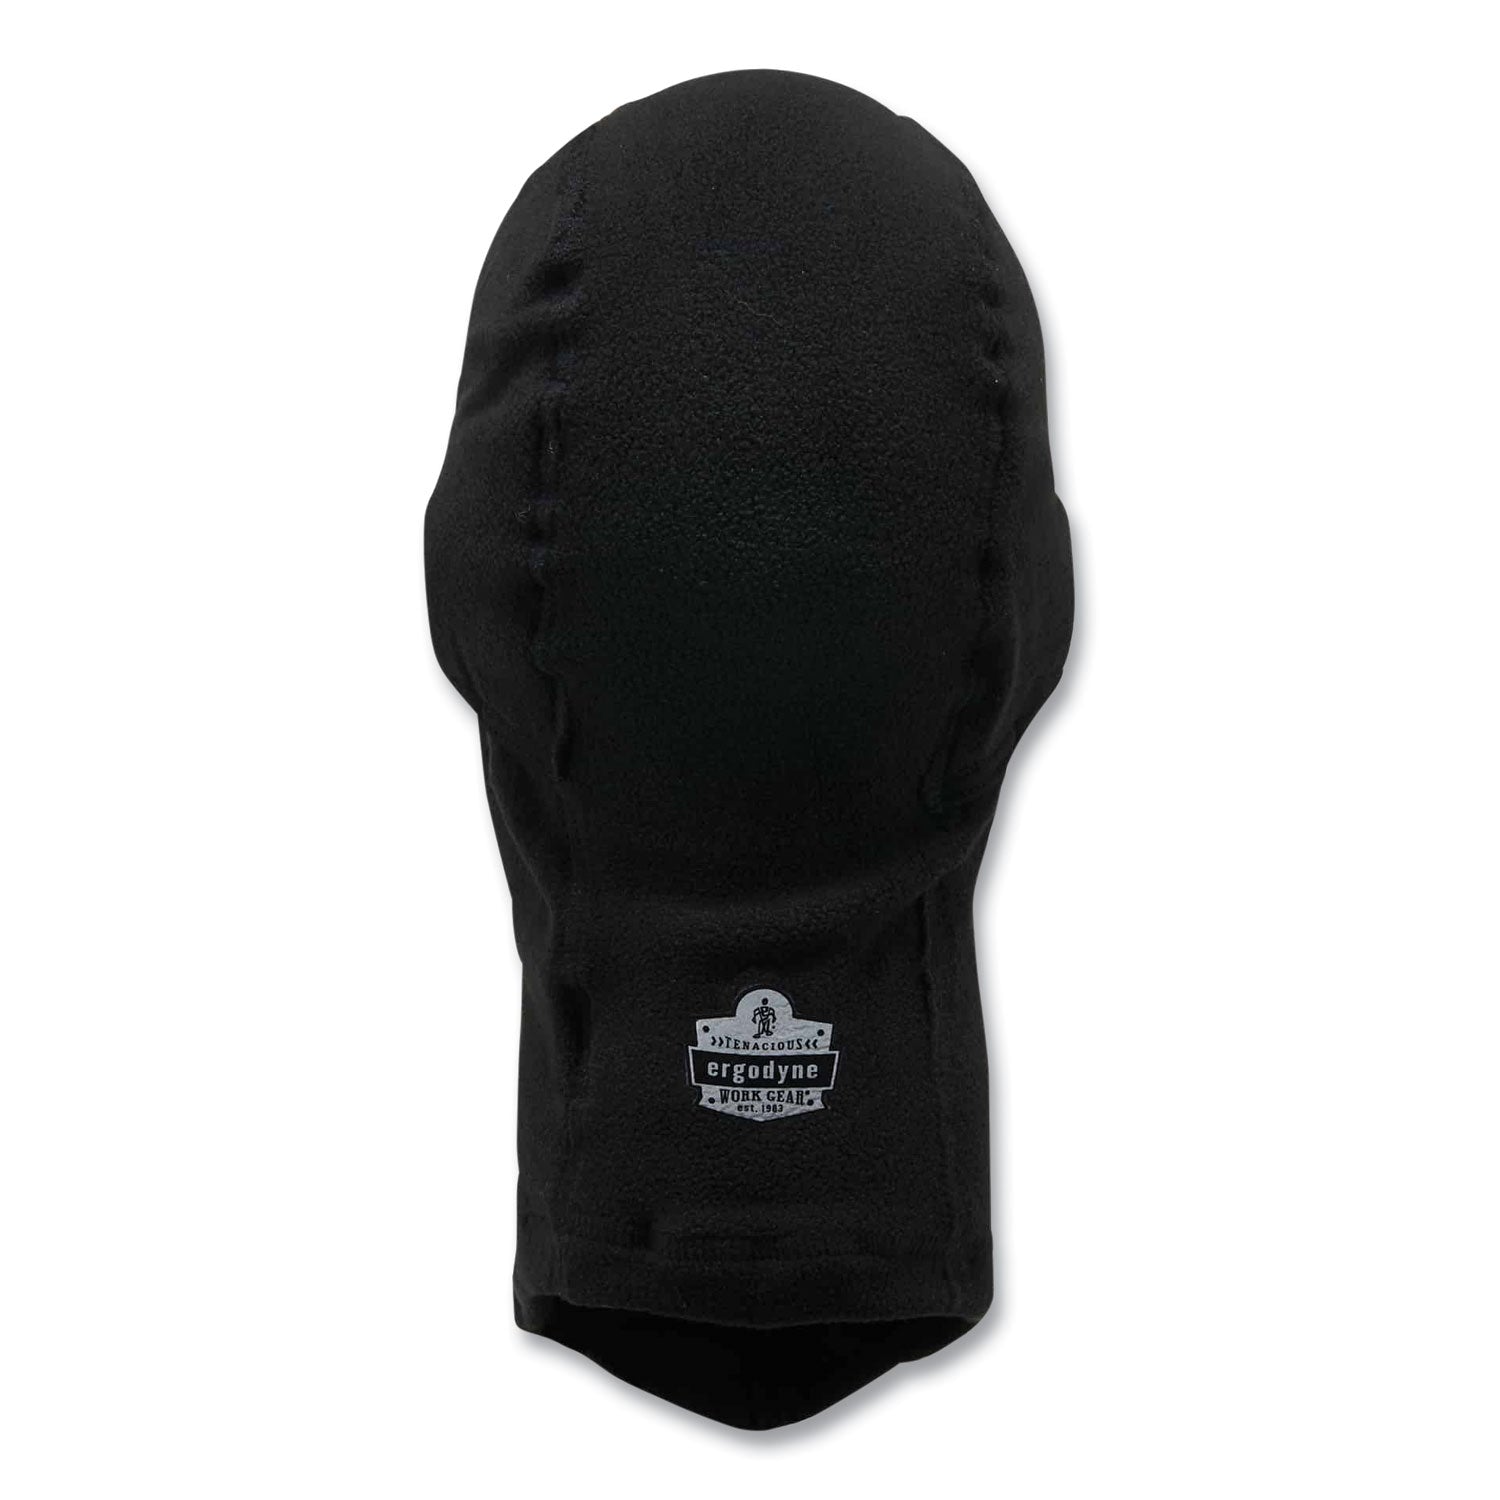 n-ferno-6823-hinged-balaclava-face-mask-fleece-one-size-fits-most-black-ships-in-1-3-business-days_ego16823 - 2